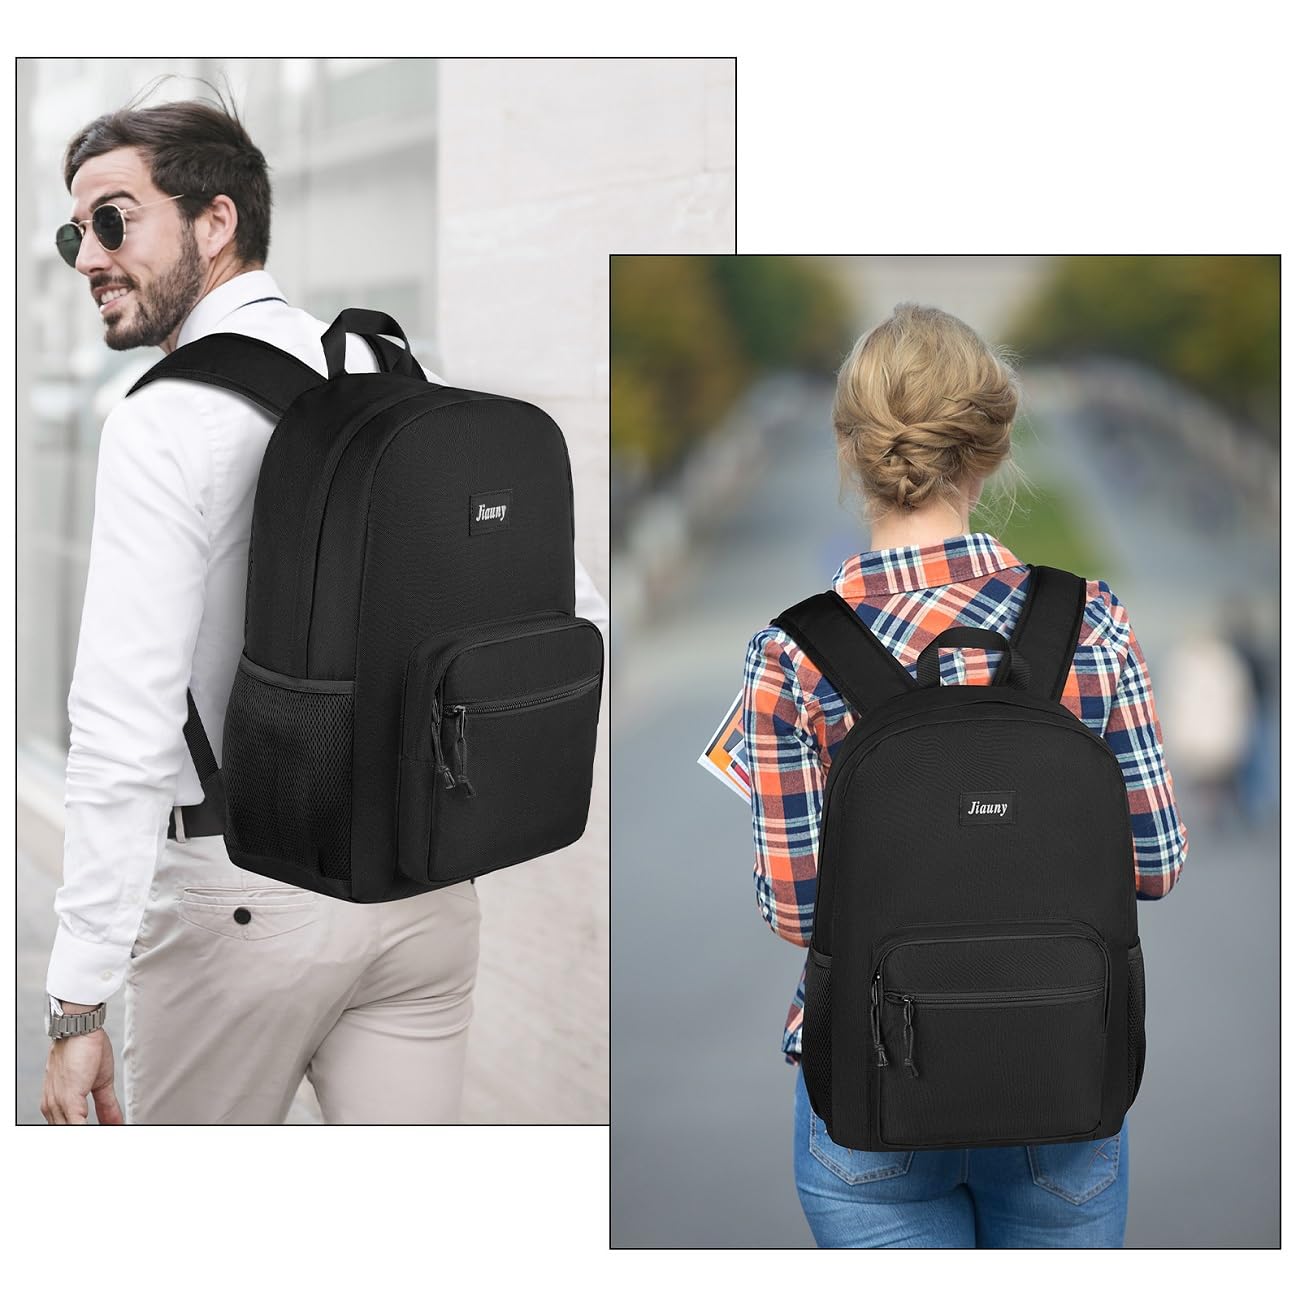 Grown-Up Laptop Bags For College Grads